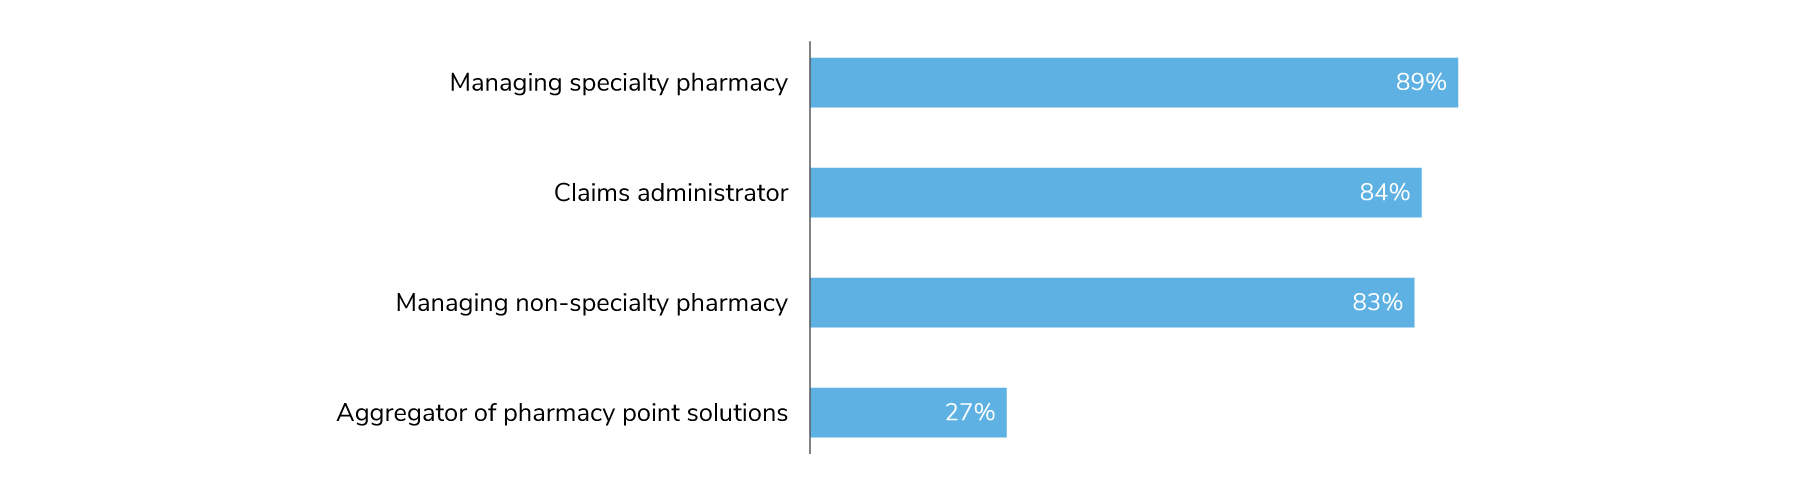 89% of employers' PBMs manage their specialty pharmacy. 83% of PBMs manage non-specialty pharmacy. 84% of PBMs act as a claims administrator.  27% are aggregators of pharmacy point solutions.